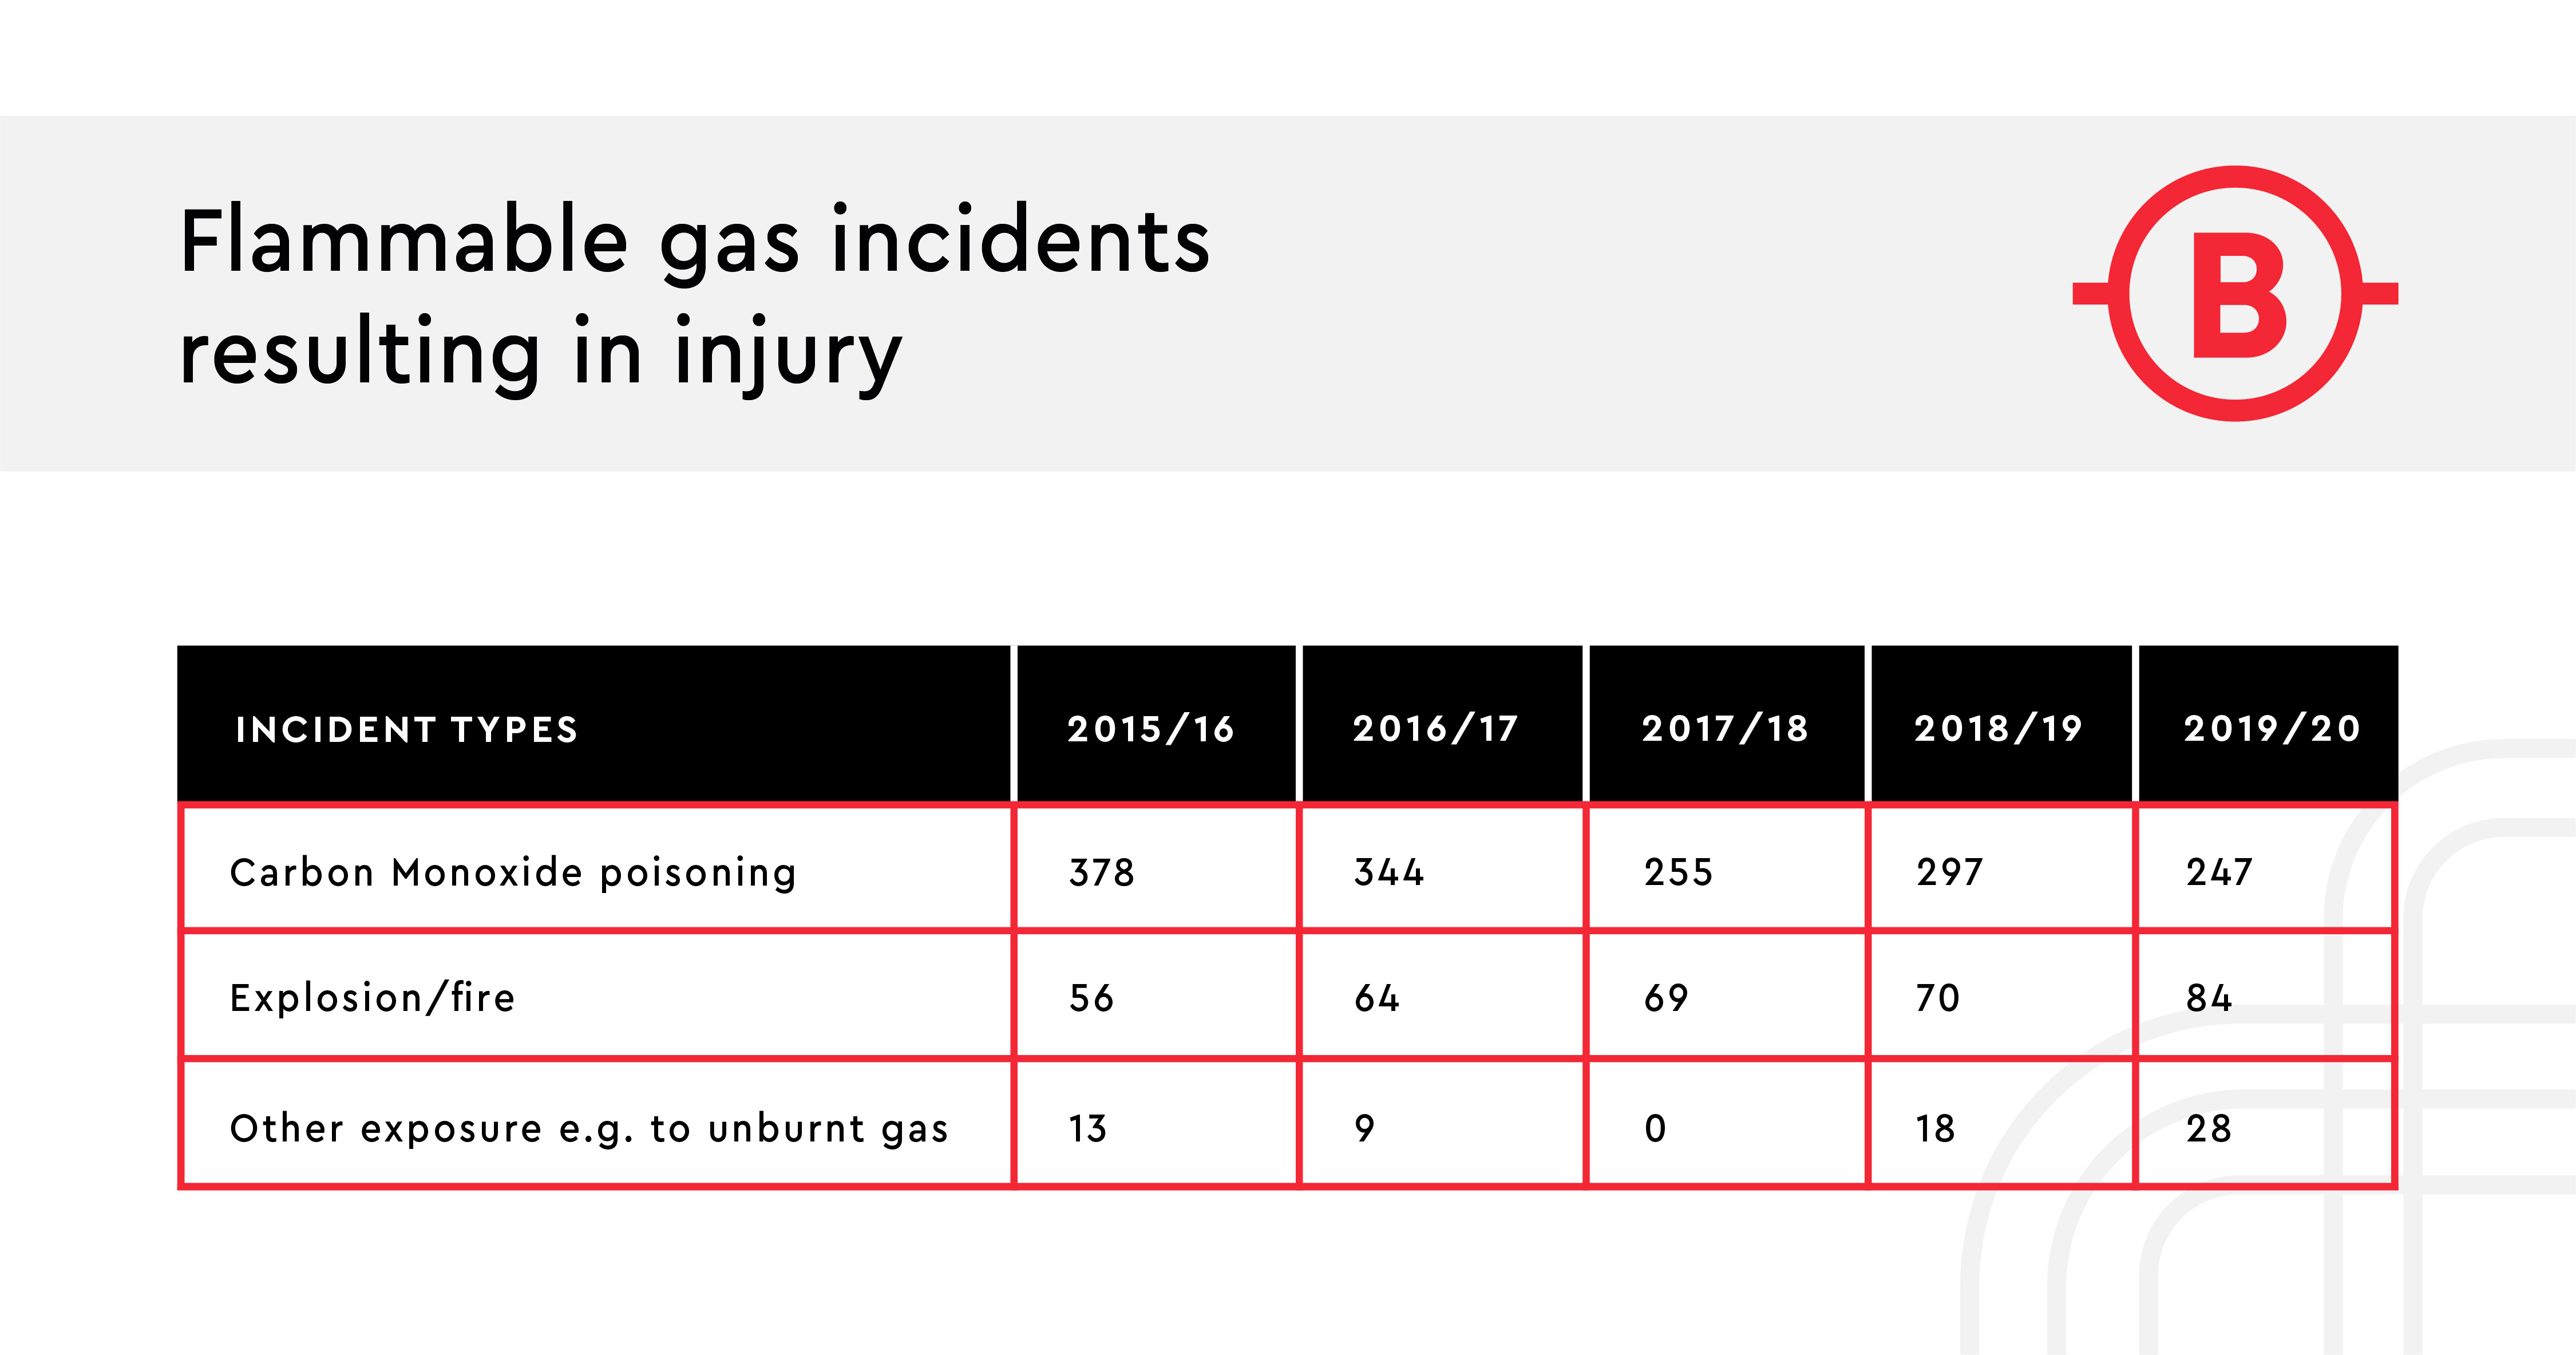 A table detailing flammable gas incidents resulting in injury